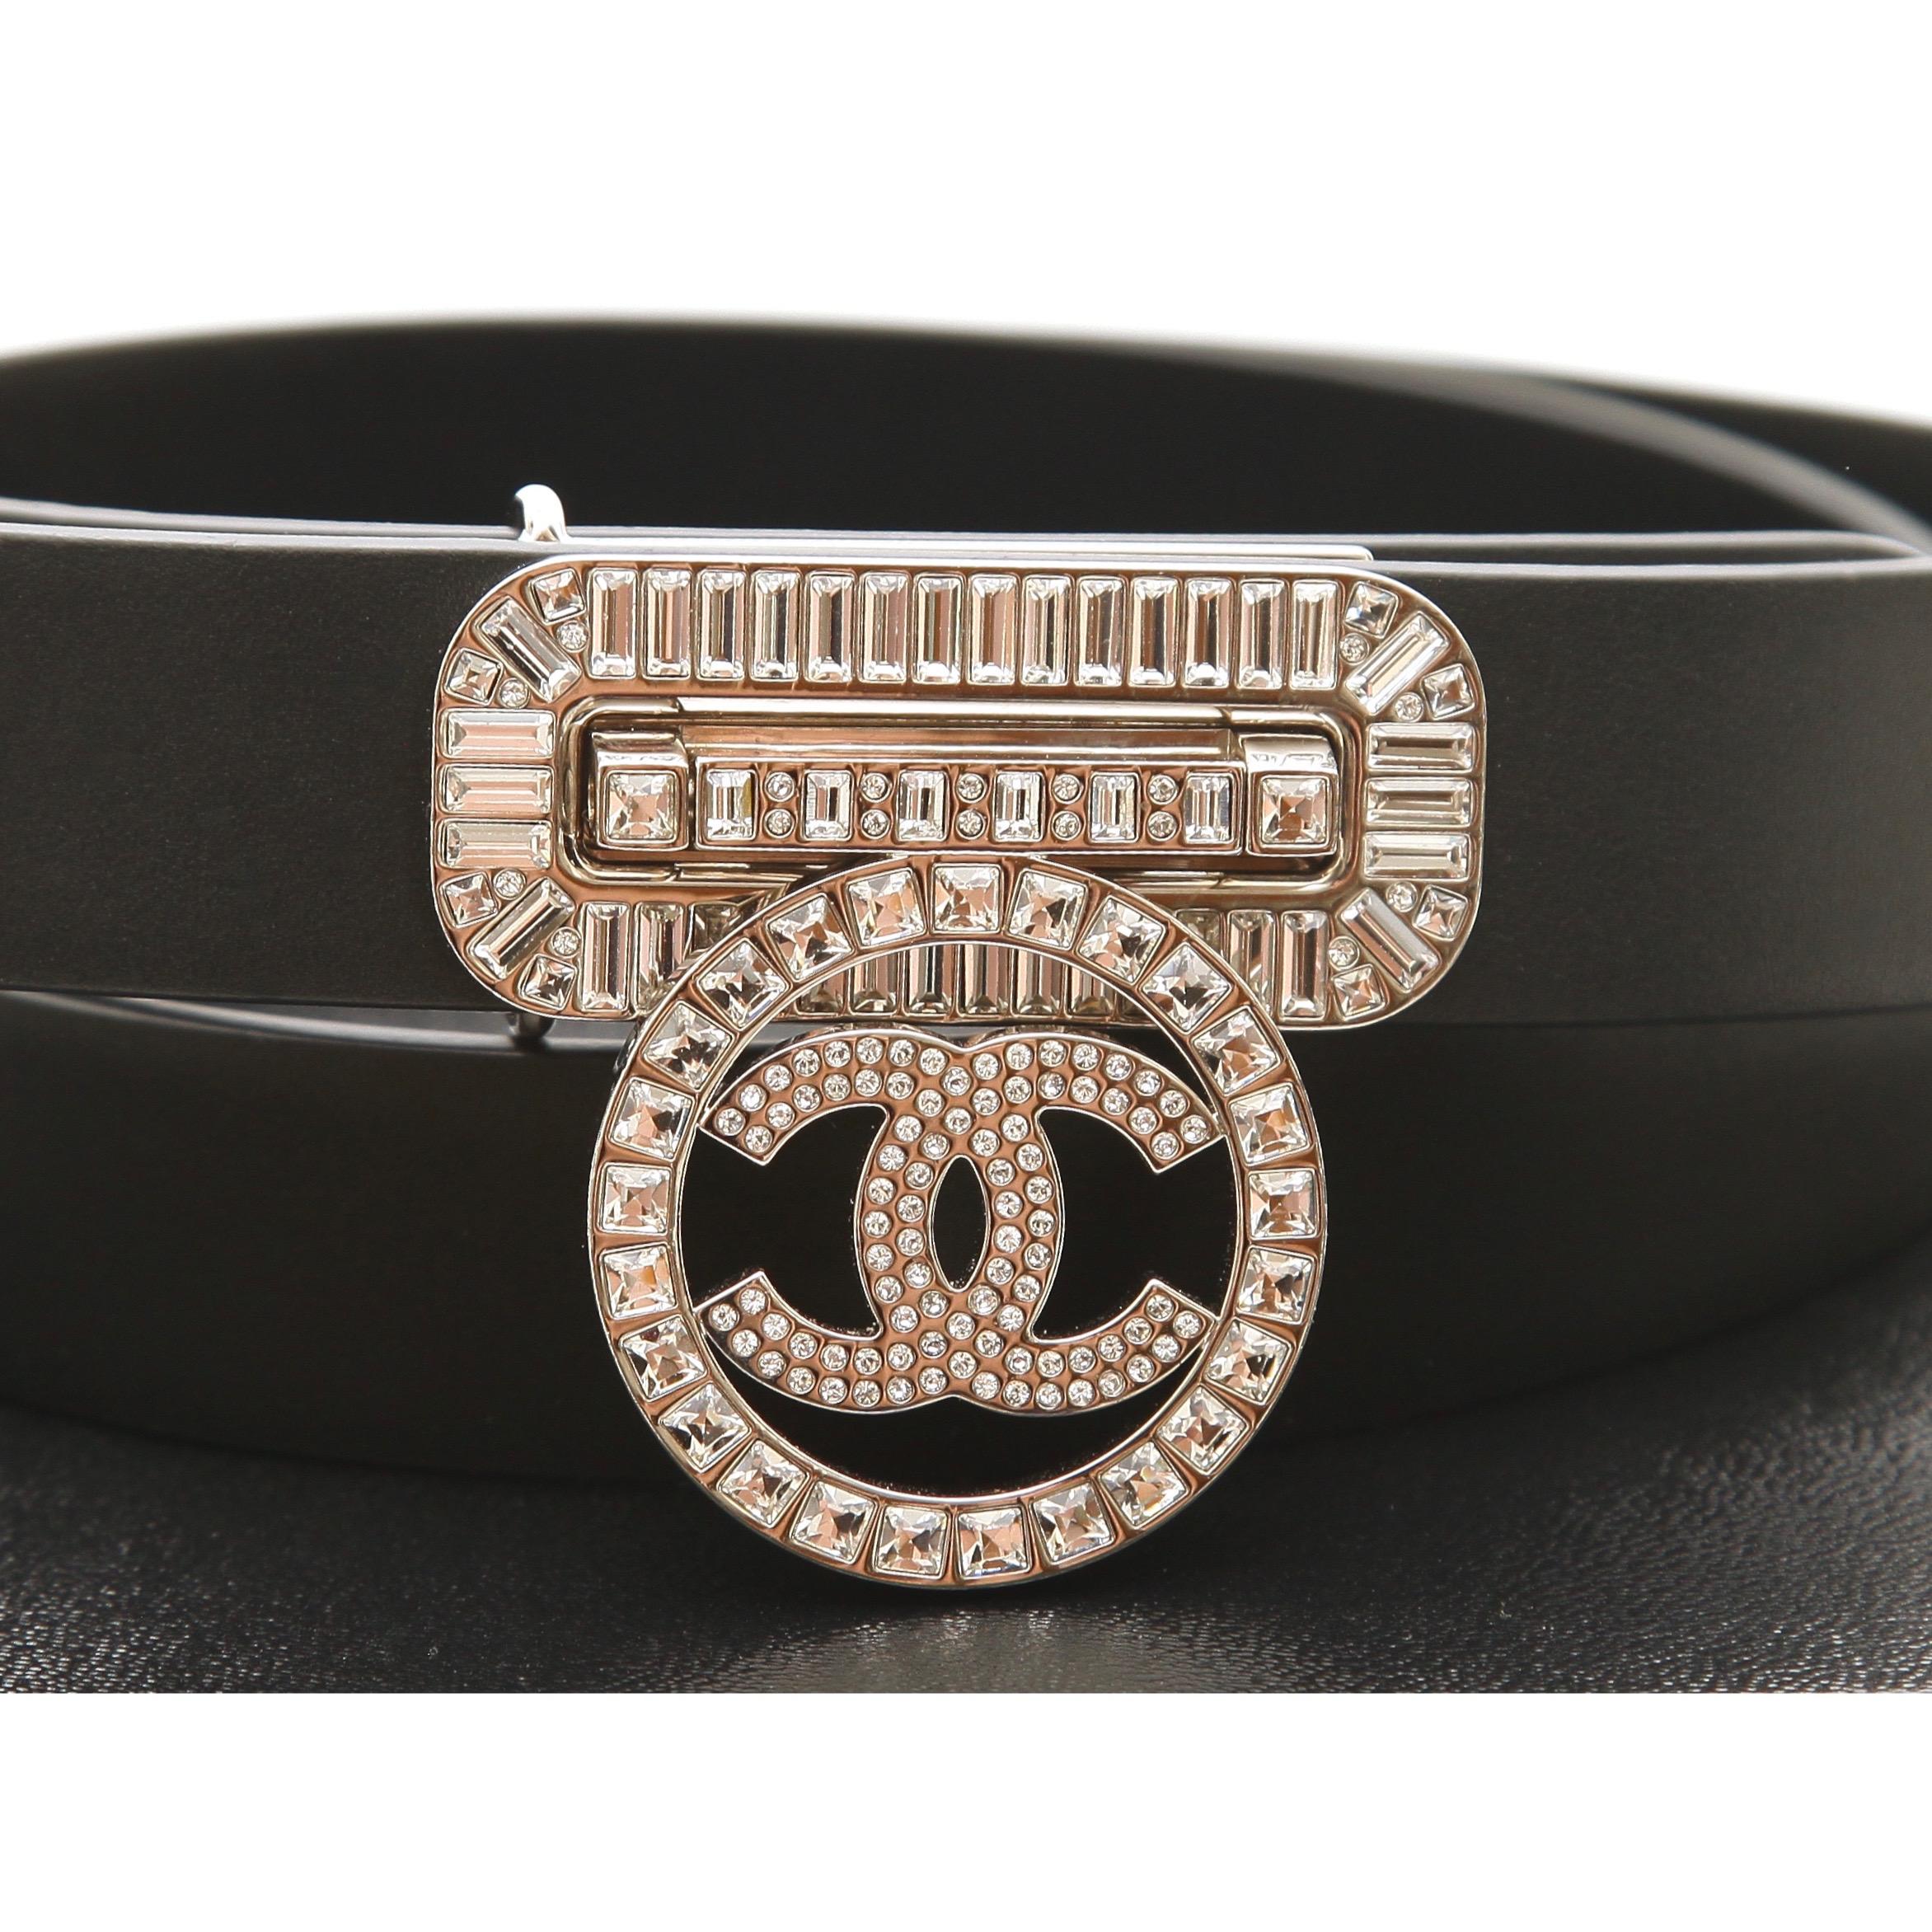 GUARANTEED AUTHENTIC CHANEL 2017 BLACK LEATHER BELT CRYSTAL CC CLOSURE

Details:
- Black leather waist belt.
- Front crystal CC logo buckle that slides into the crystal buckle opening and flaps down to close.
- 3 hole closure.
- Comes with Chanel